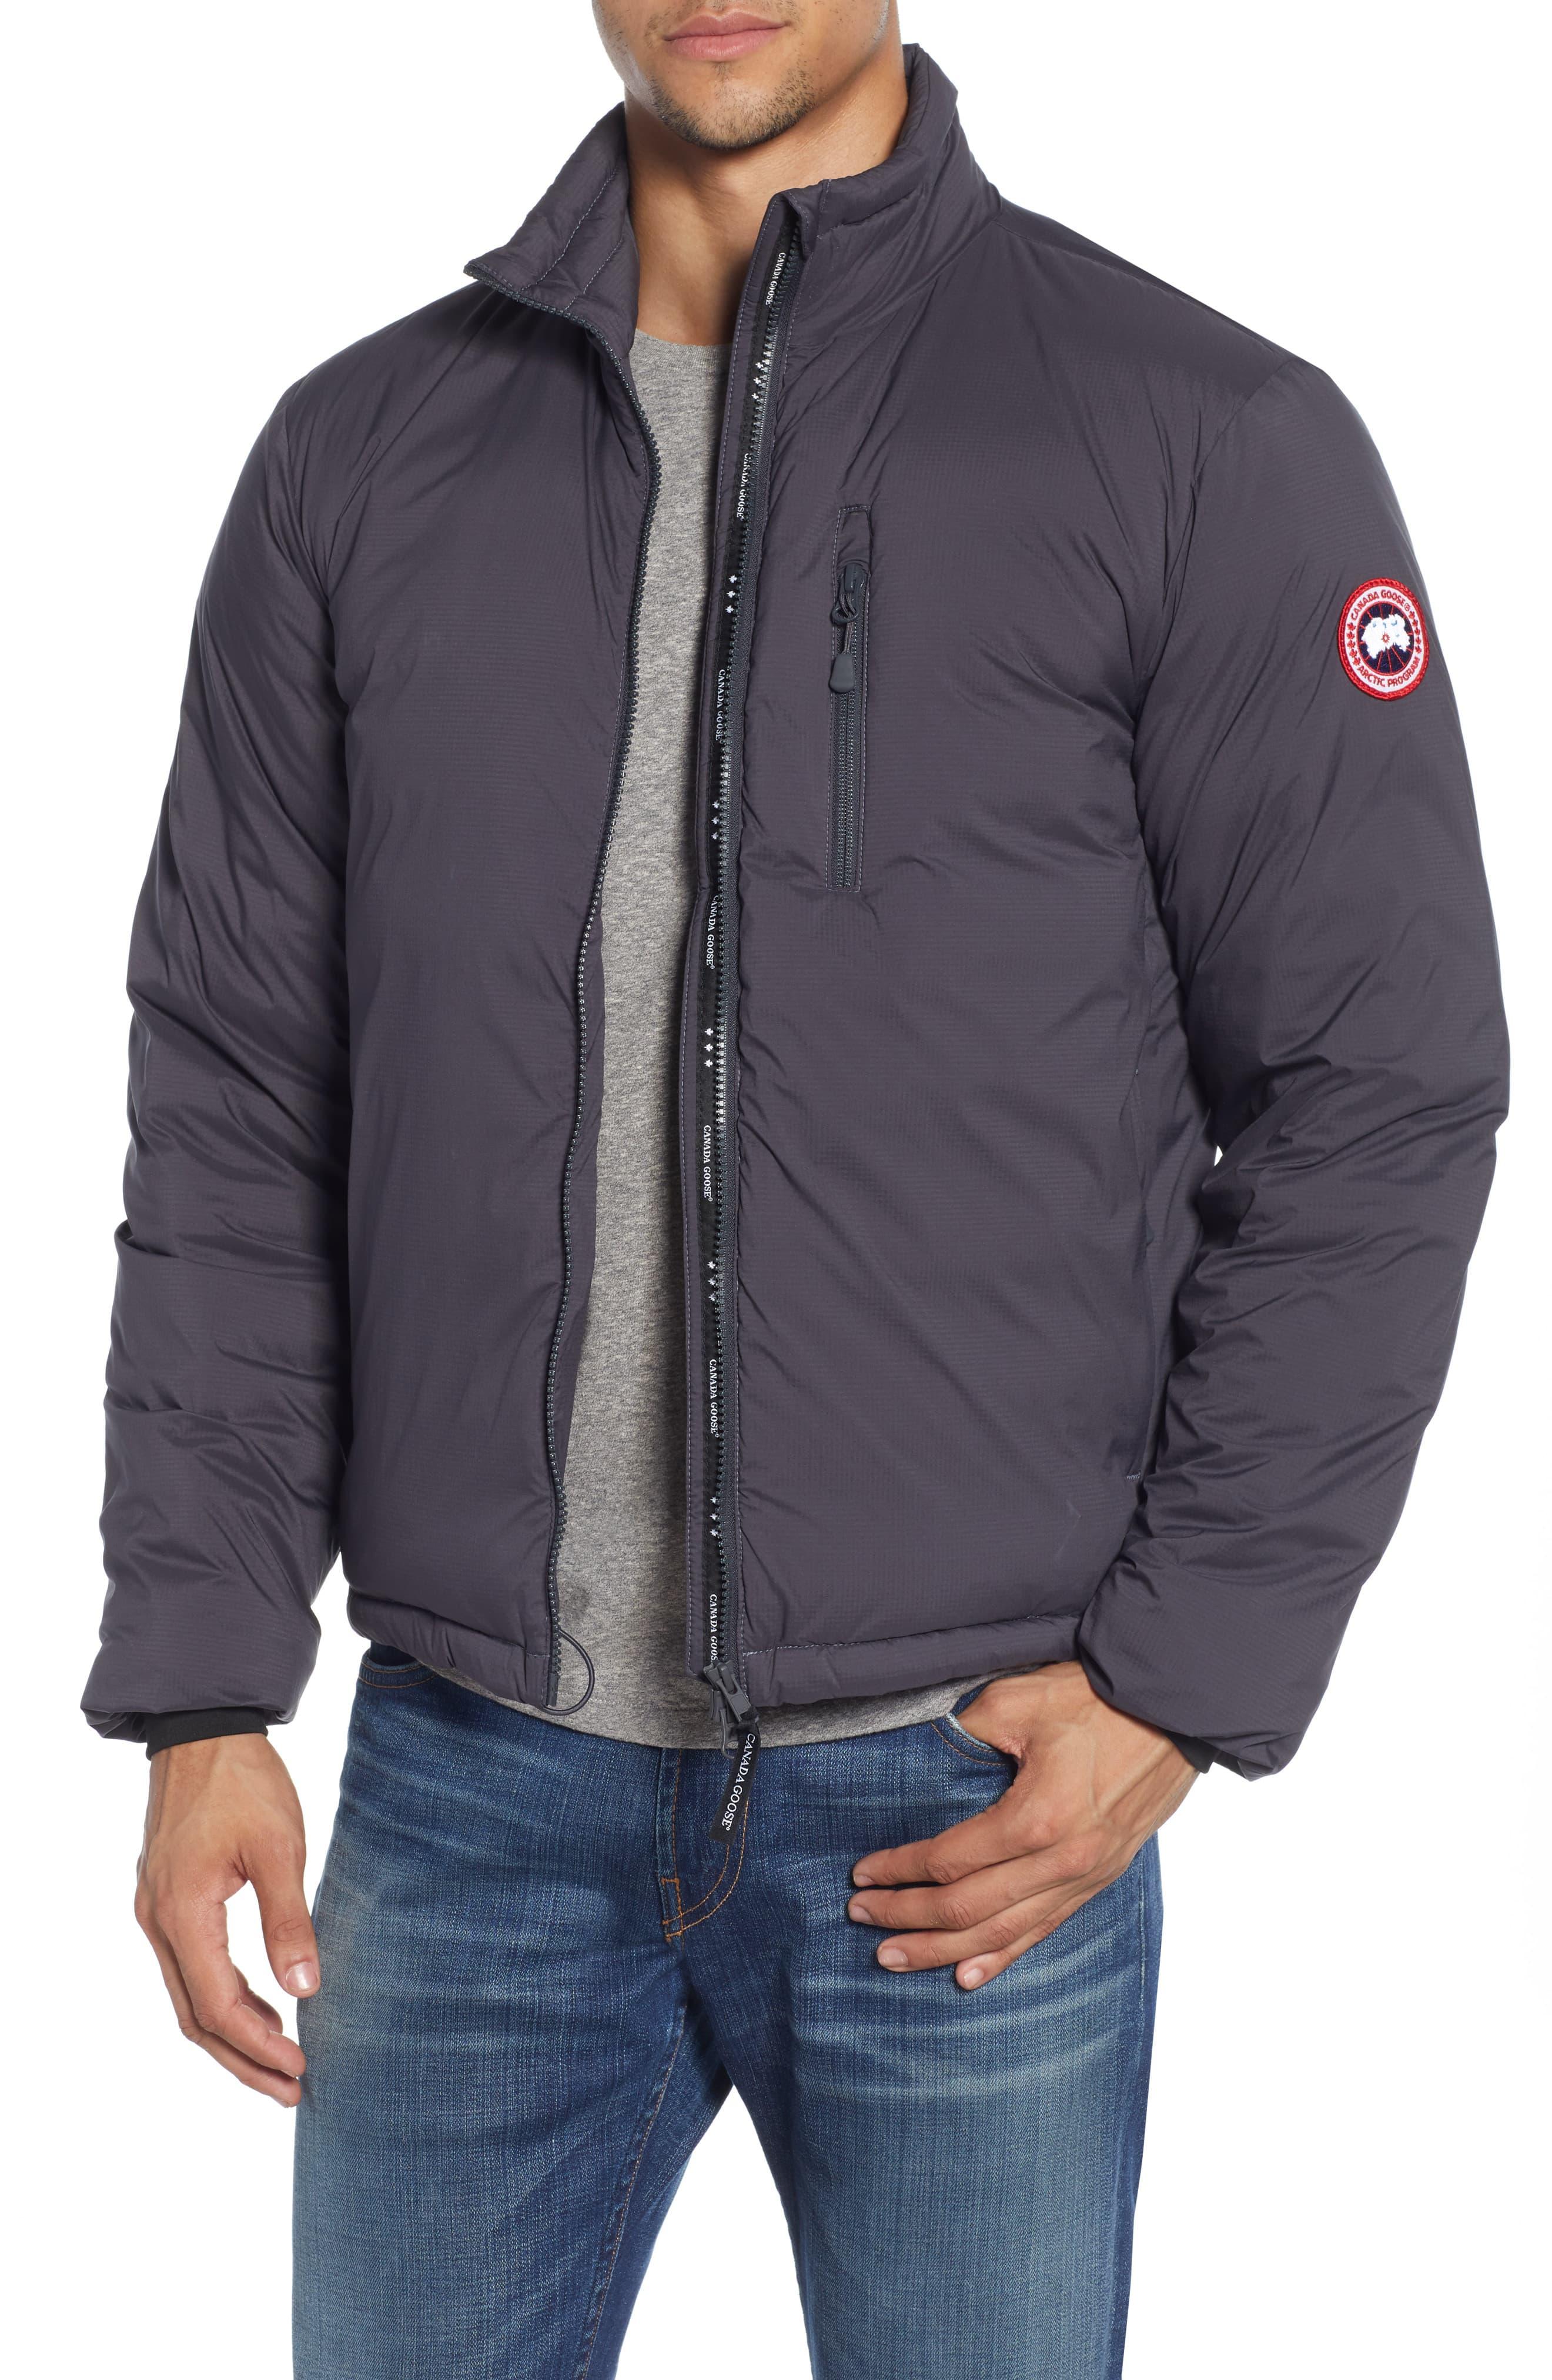 Canada Goose Lodge Packable 750 Fill Power Down Jacket, Grey in ...